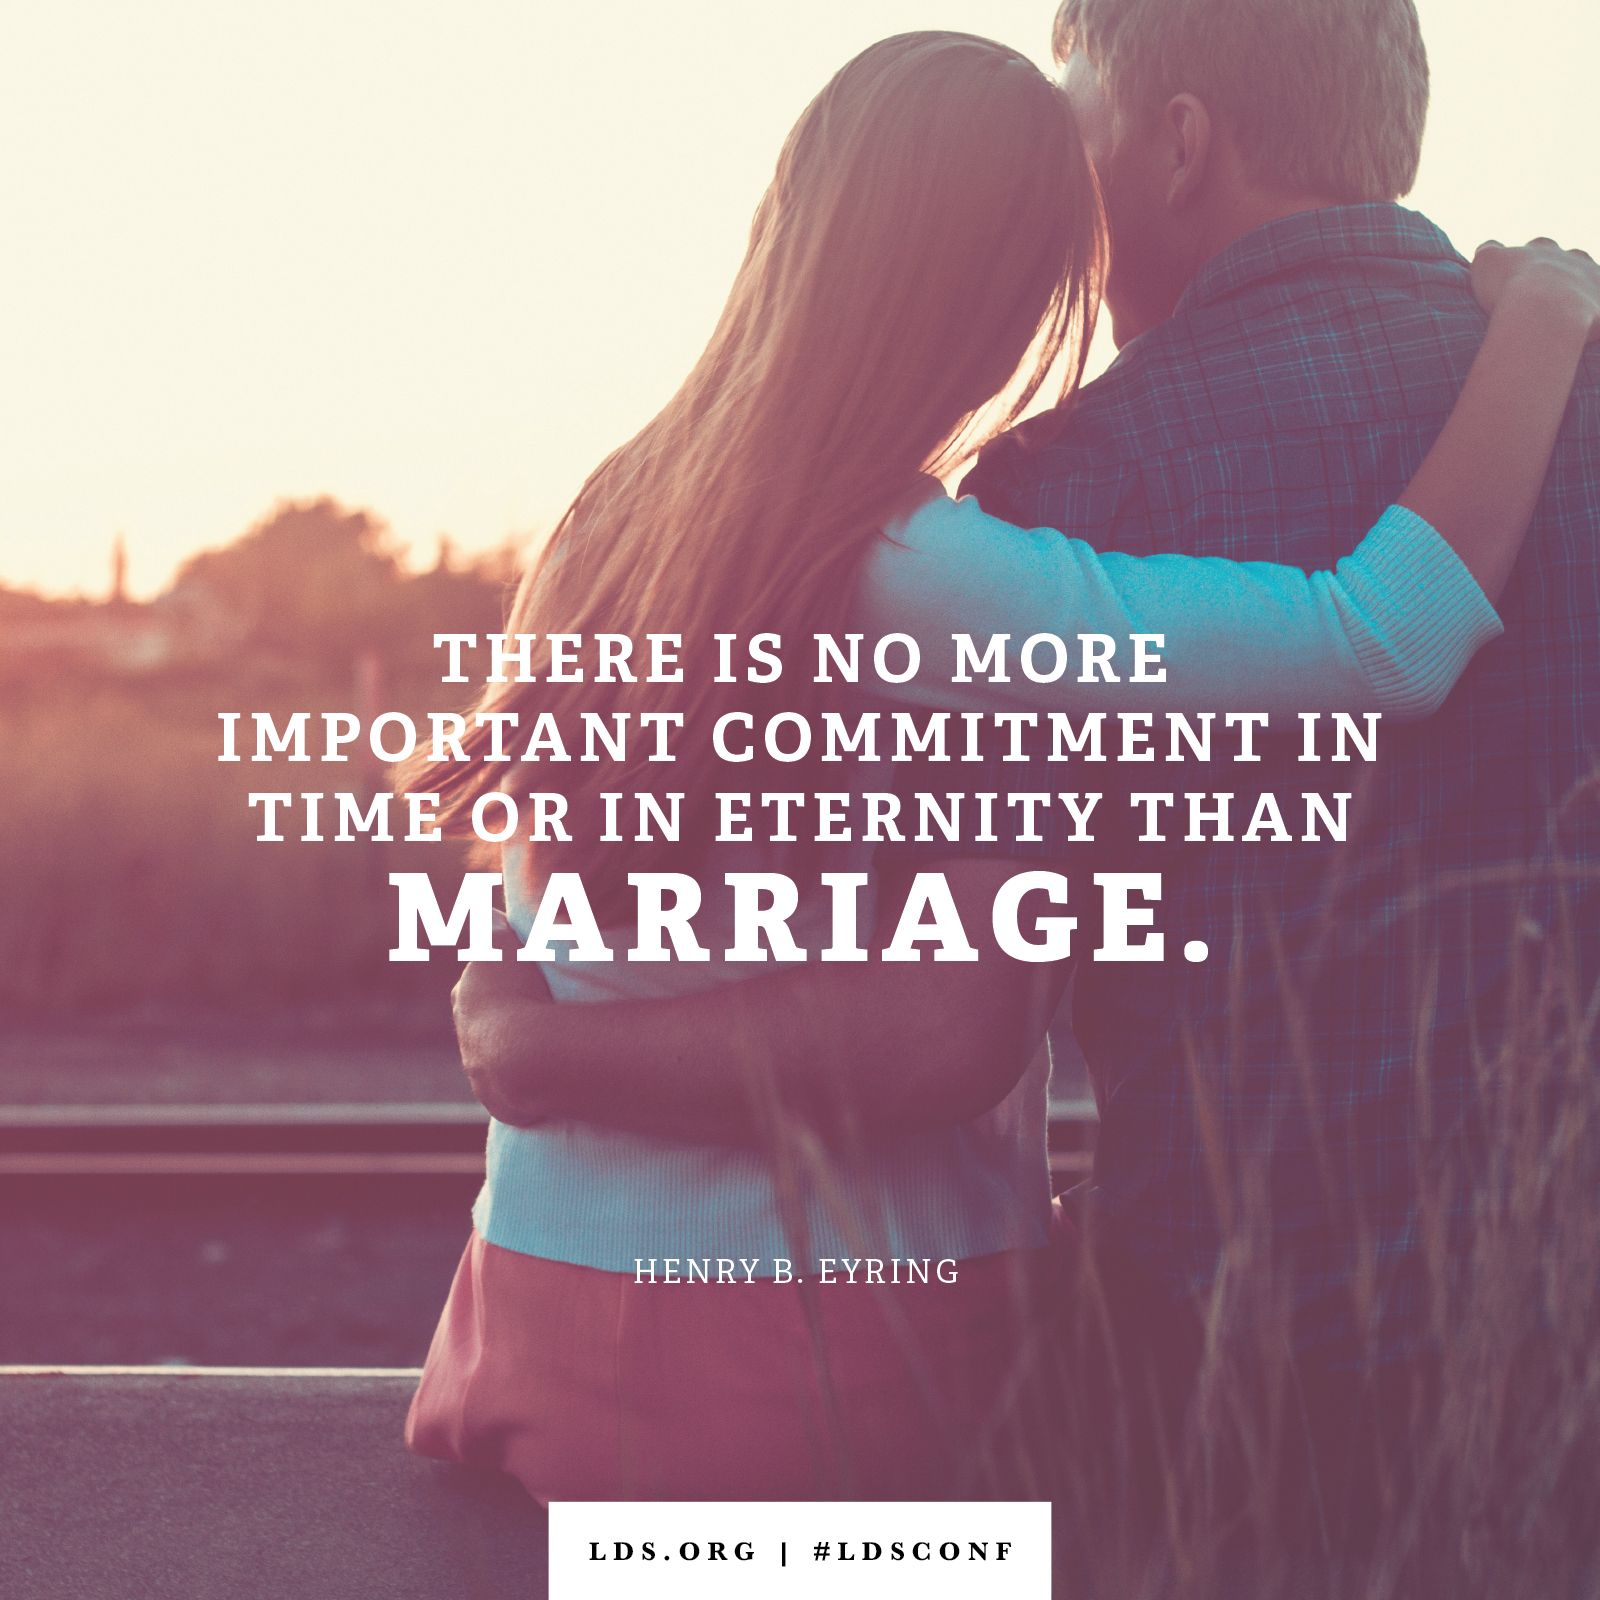 “There is no more important commitment in time or in eternity than marriage.” —President Henry B. Eyring, “Eternal Families”